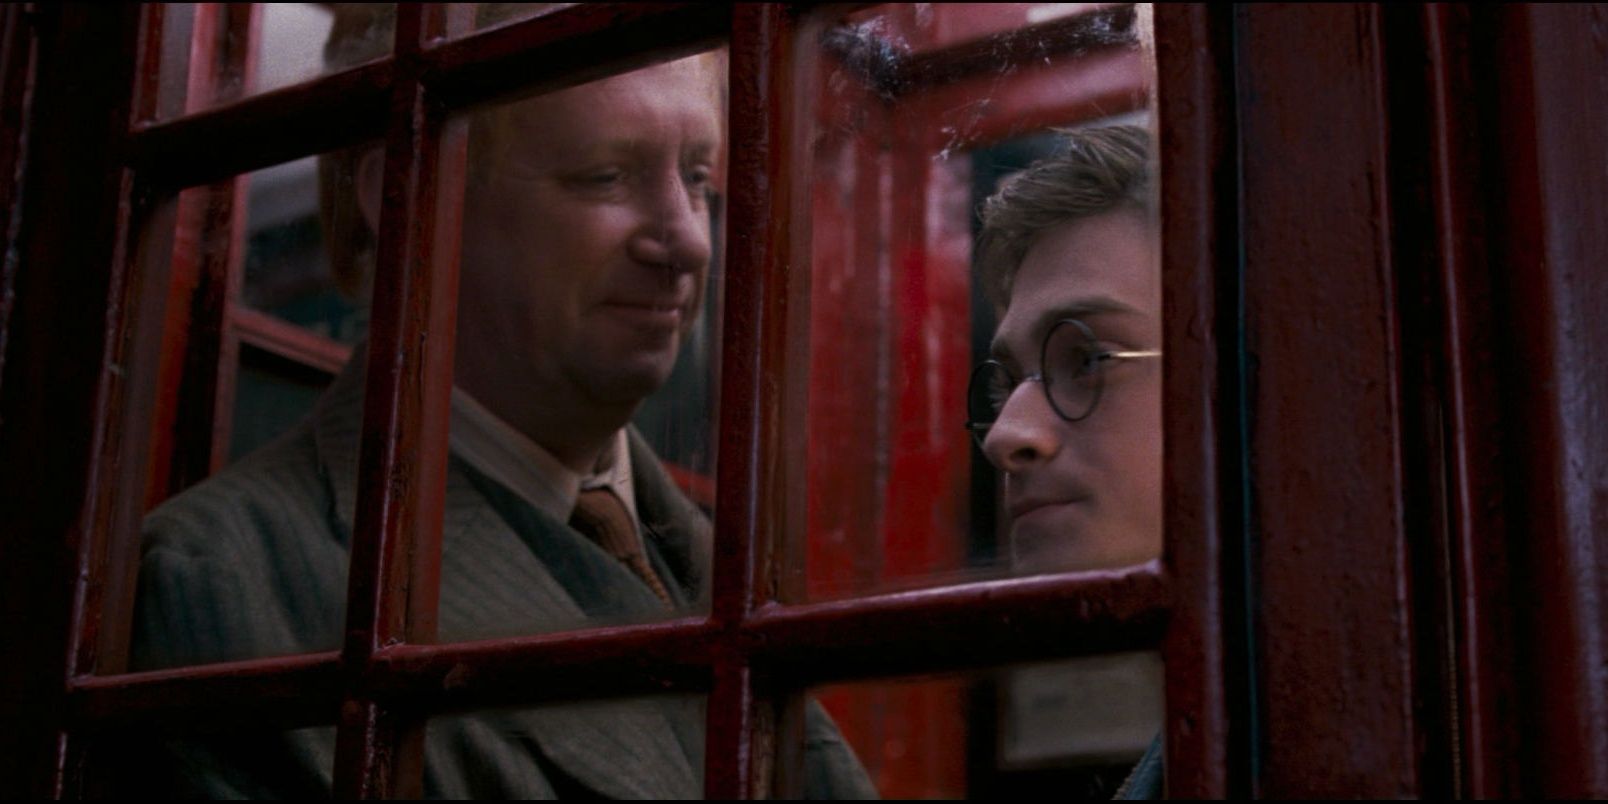 Harry and Arthur Weasley standing in a phone booth in Harry Potter. 